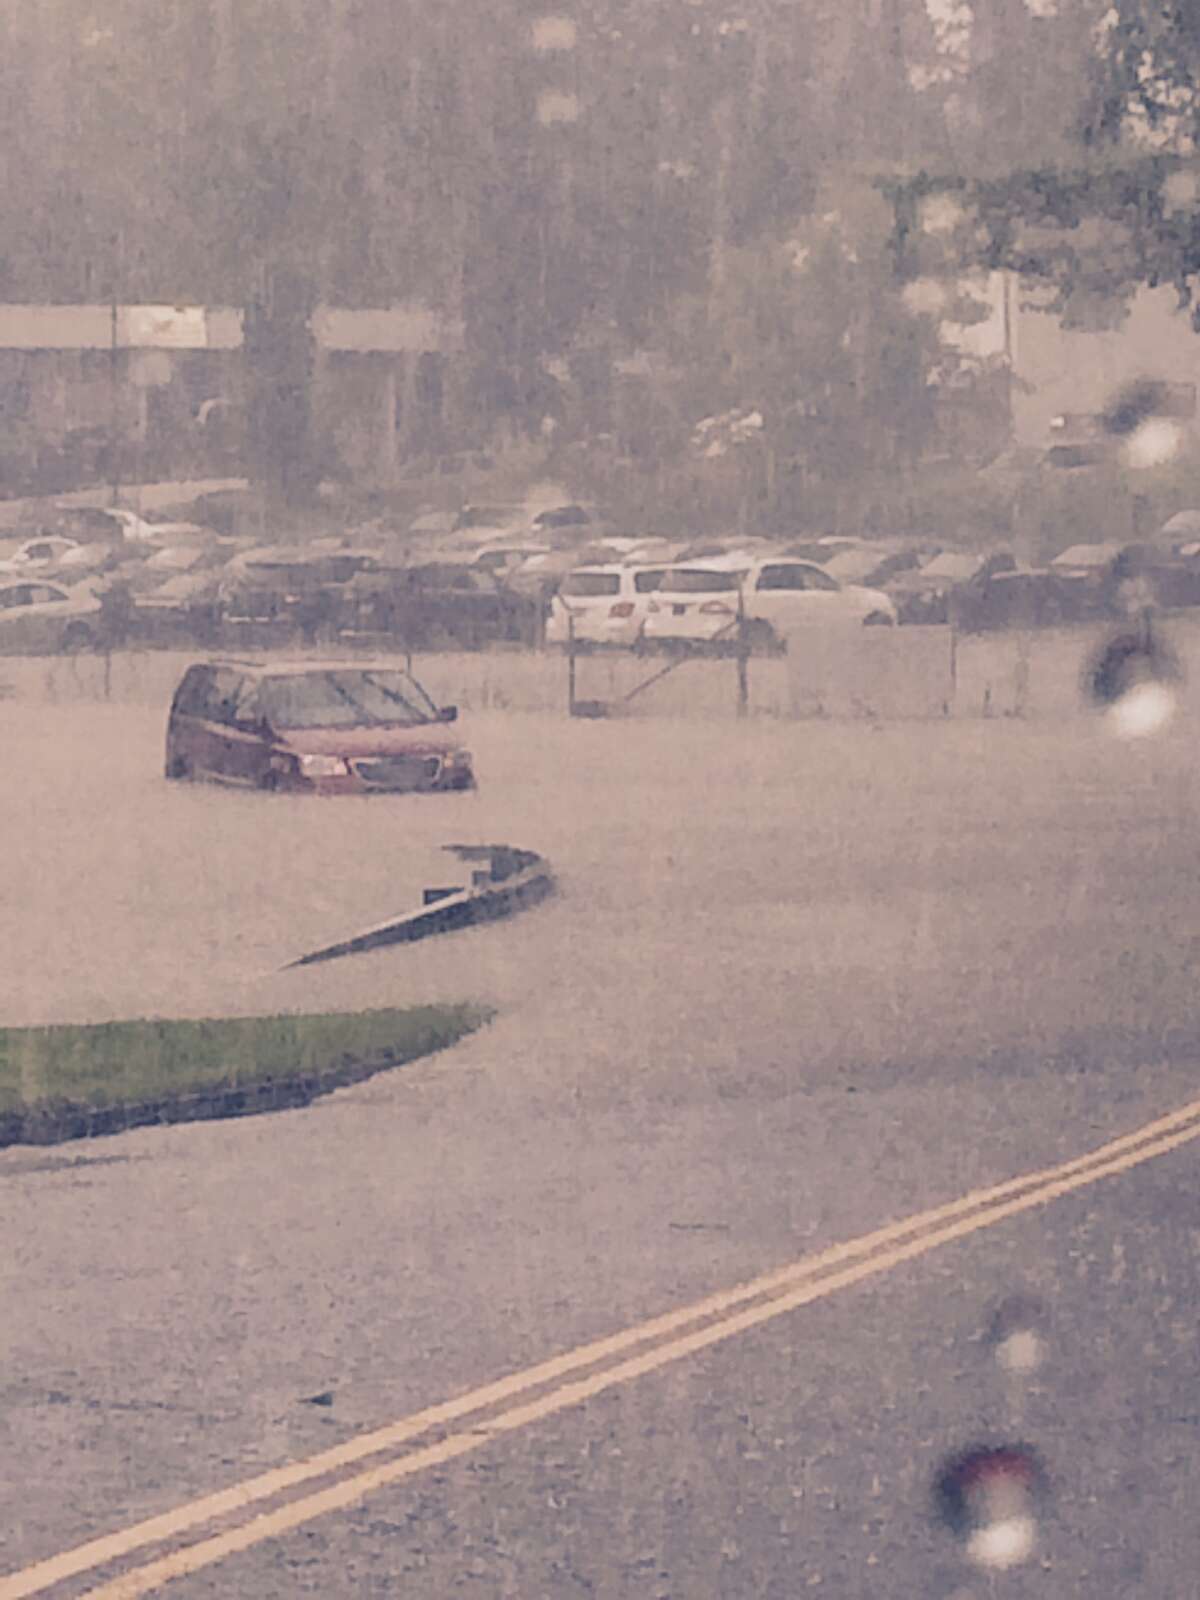 Danbury at around 4:00pm on Beaver Brook Rd. - right in front of Durkin Awnings. Photo courtesy Marc Huberman